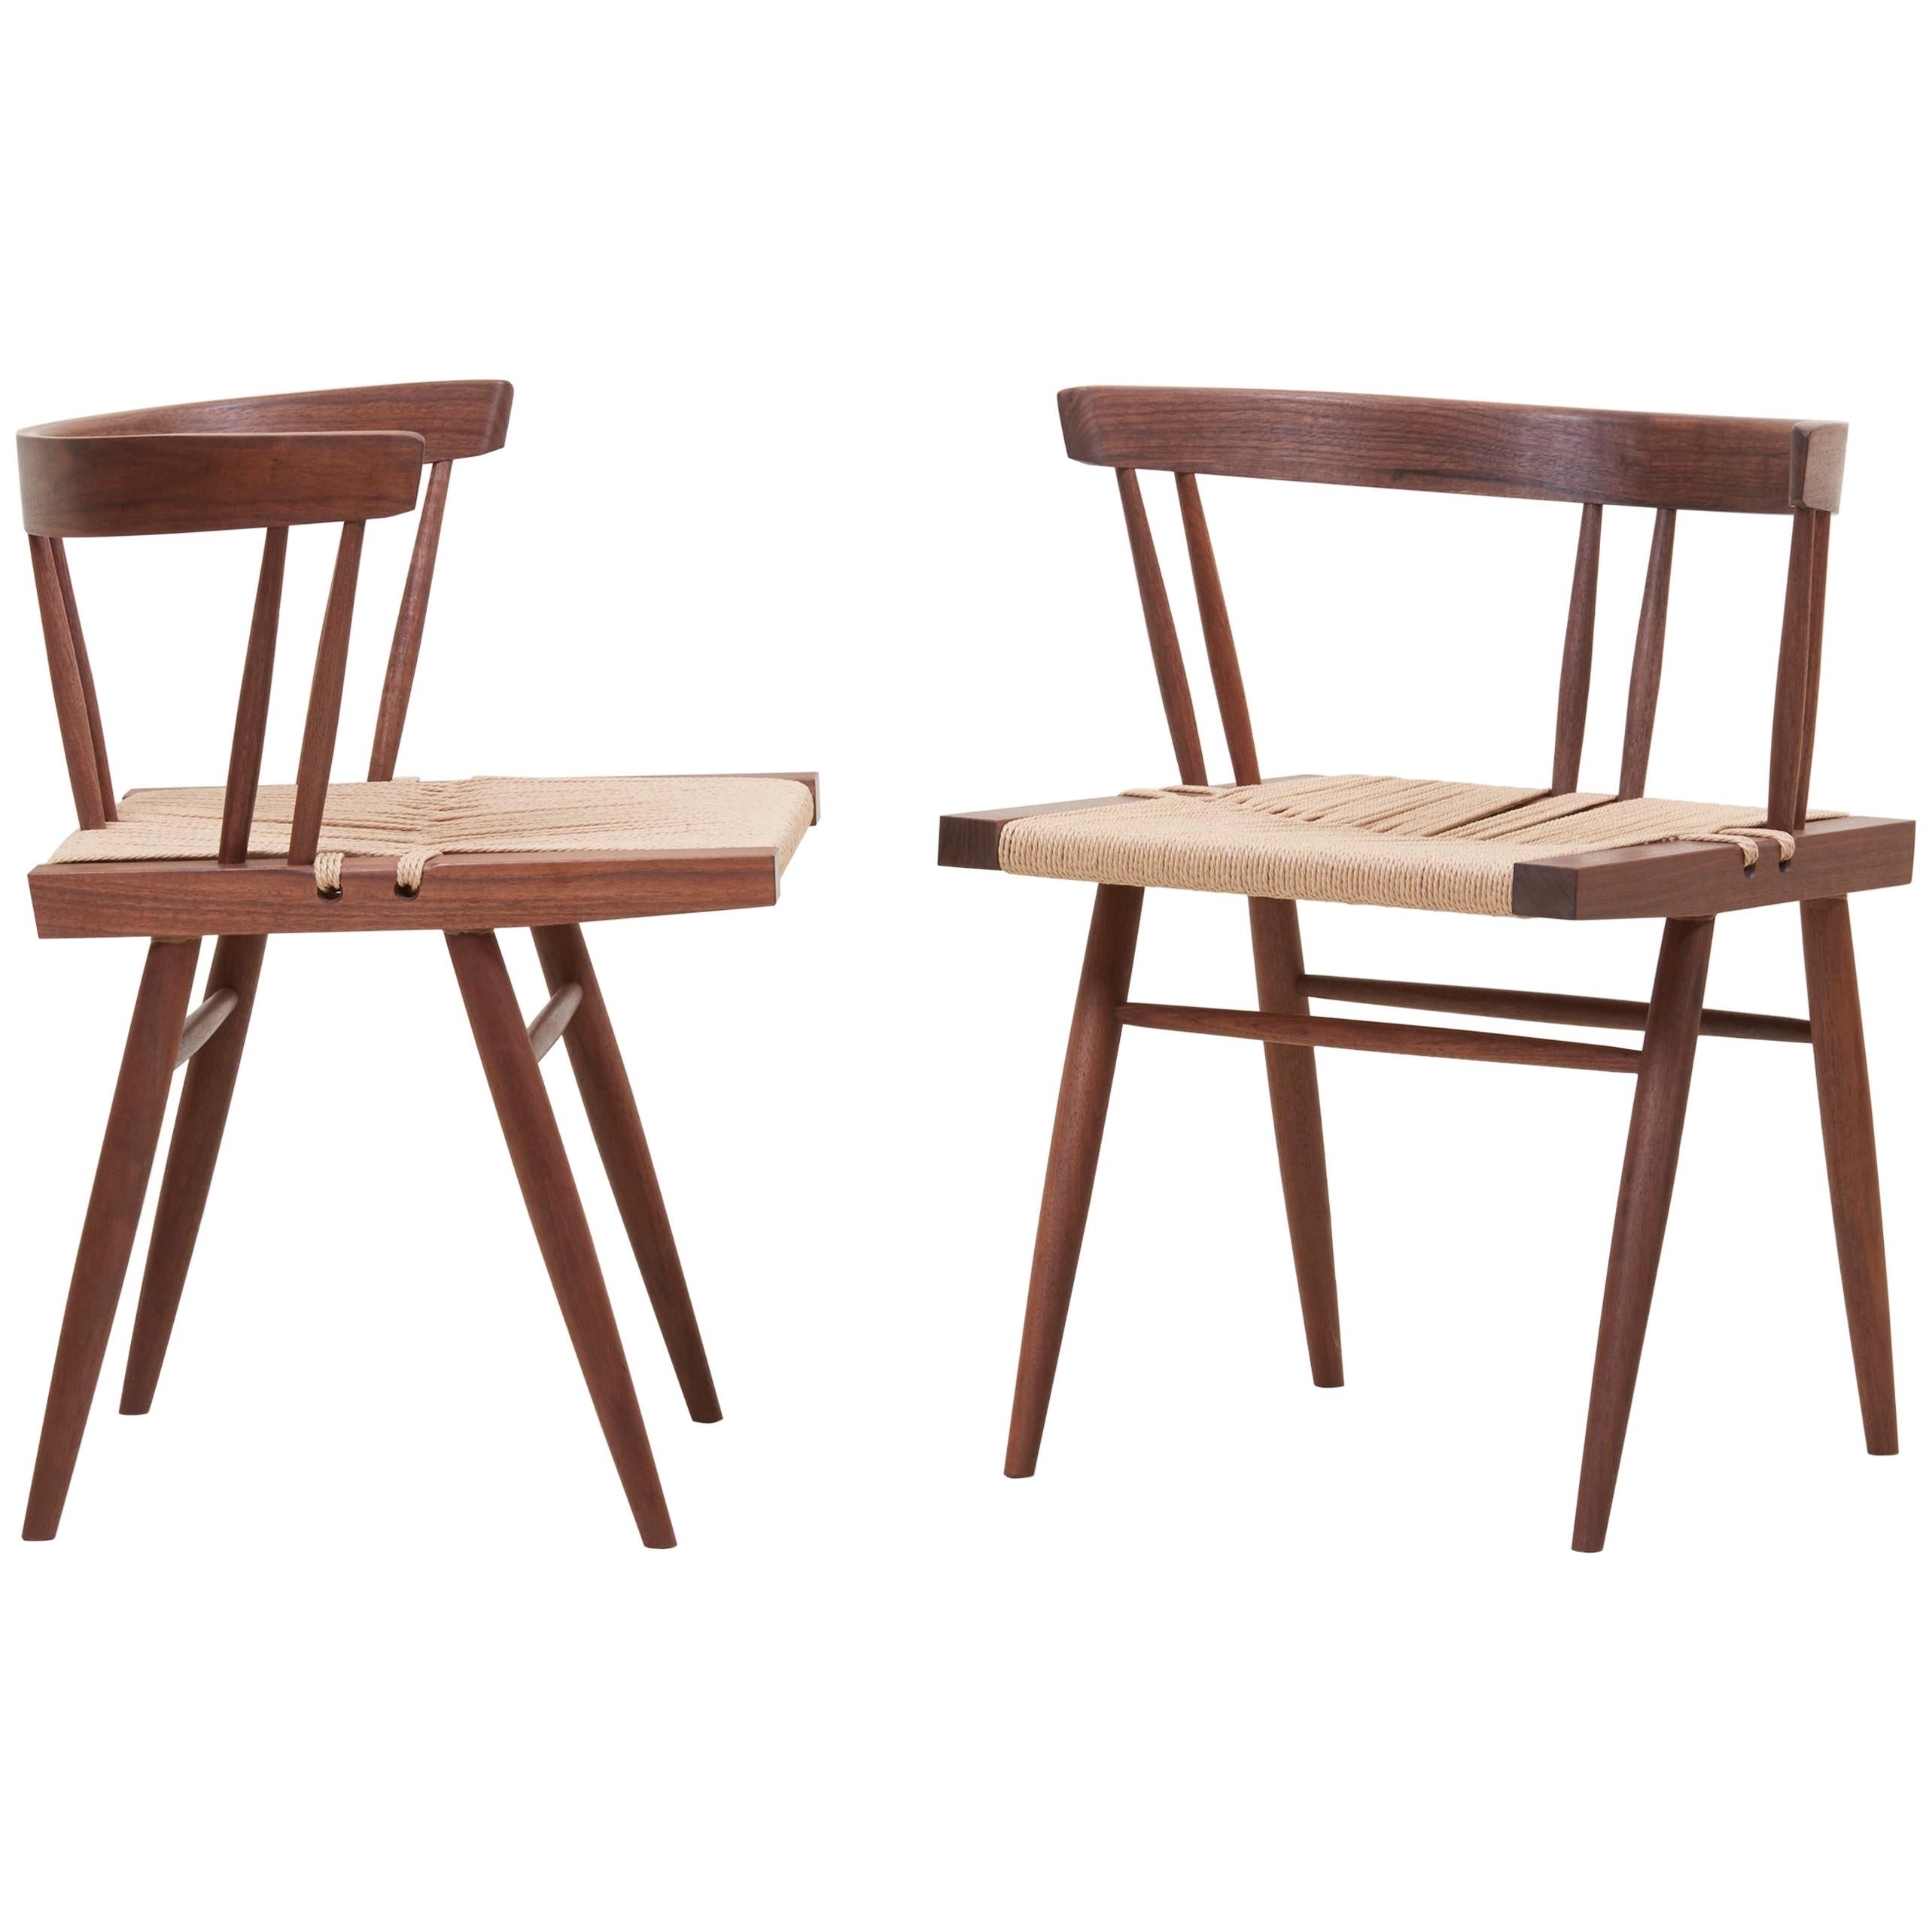 Pair of Grass Seated Dining Chairs by George Nakashima Studio, US, 2019